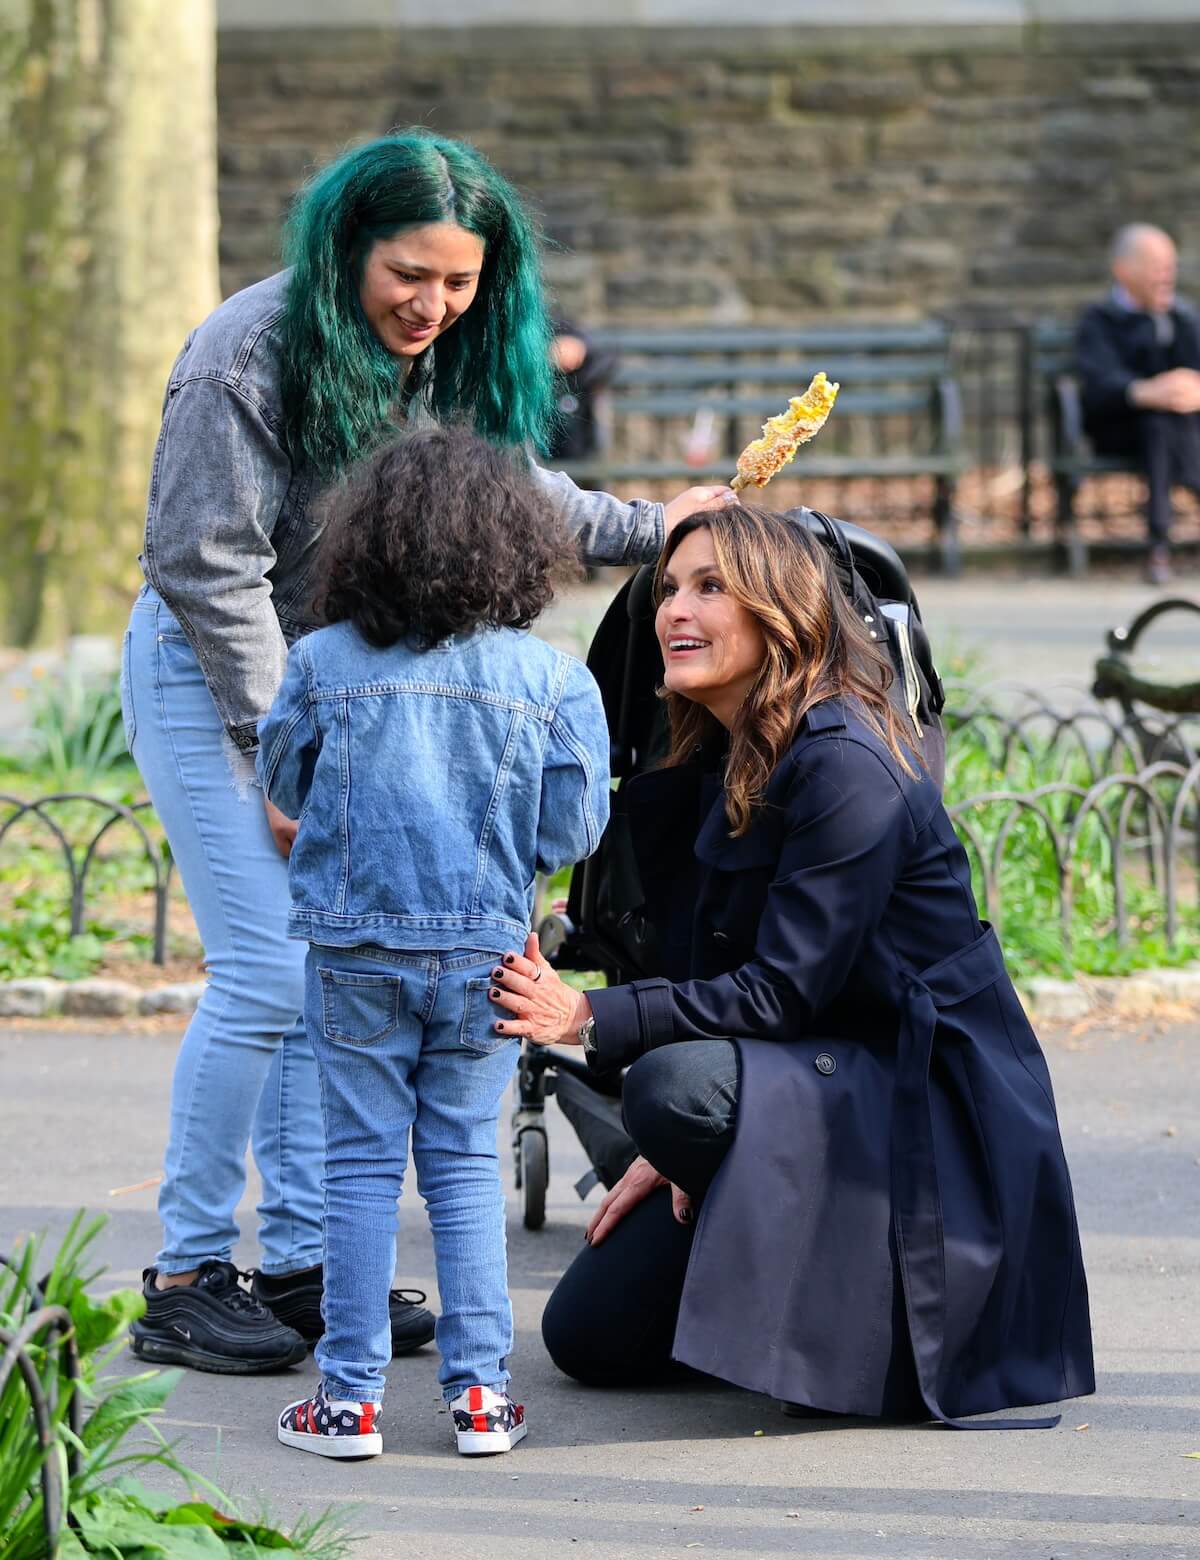 Mariska Hargitay and a woman with green hair talk to a little girl with her back to the camera